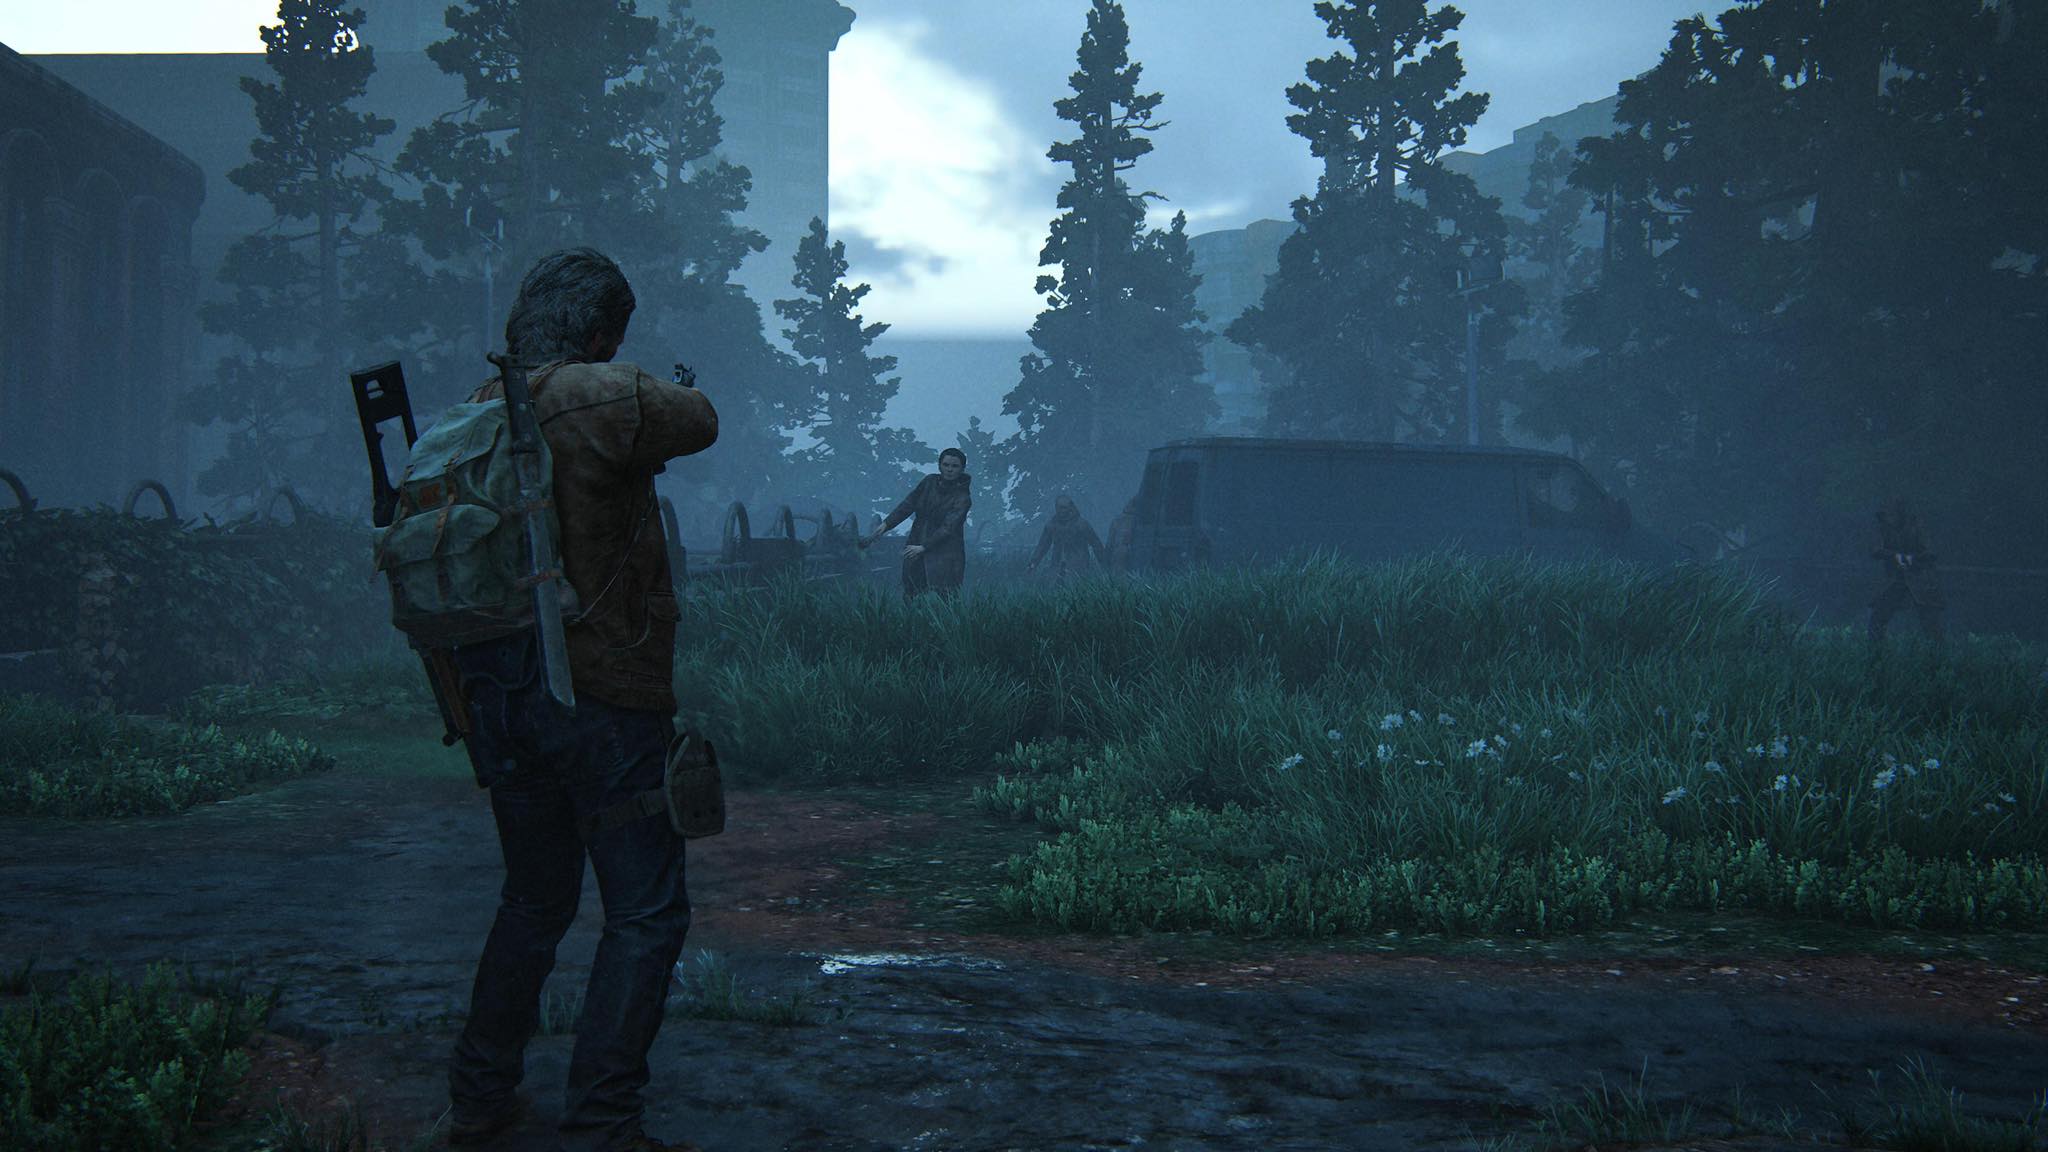 The Last of Us Part 2 Remastered delivers an accomplished upgrade for  PlayStation 5